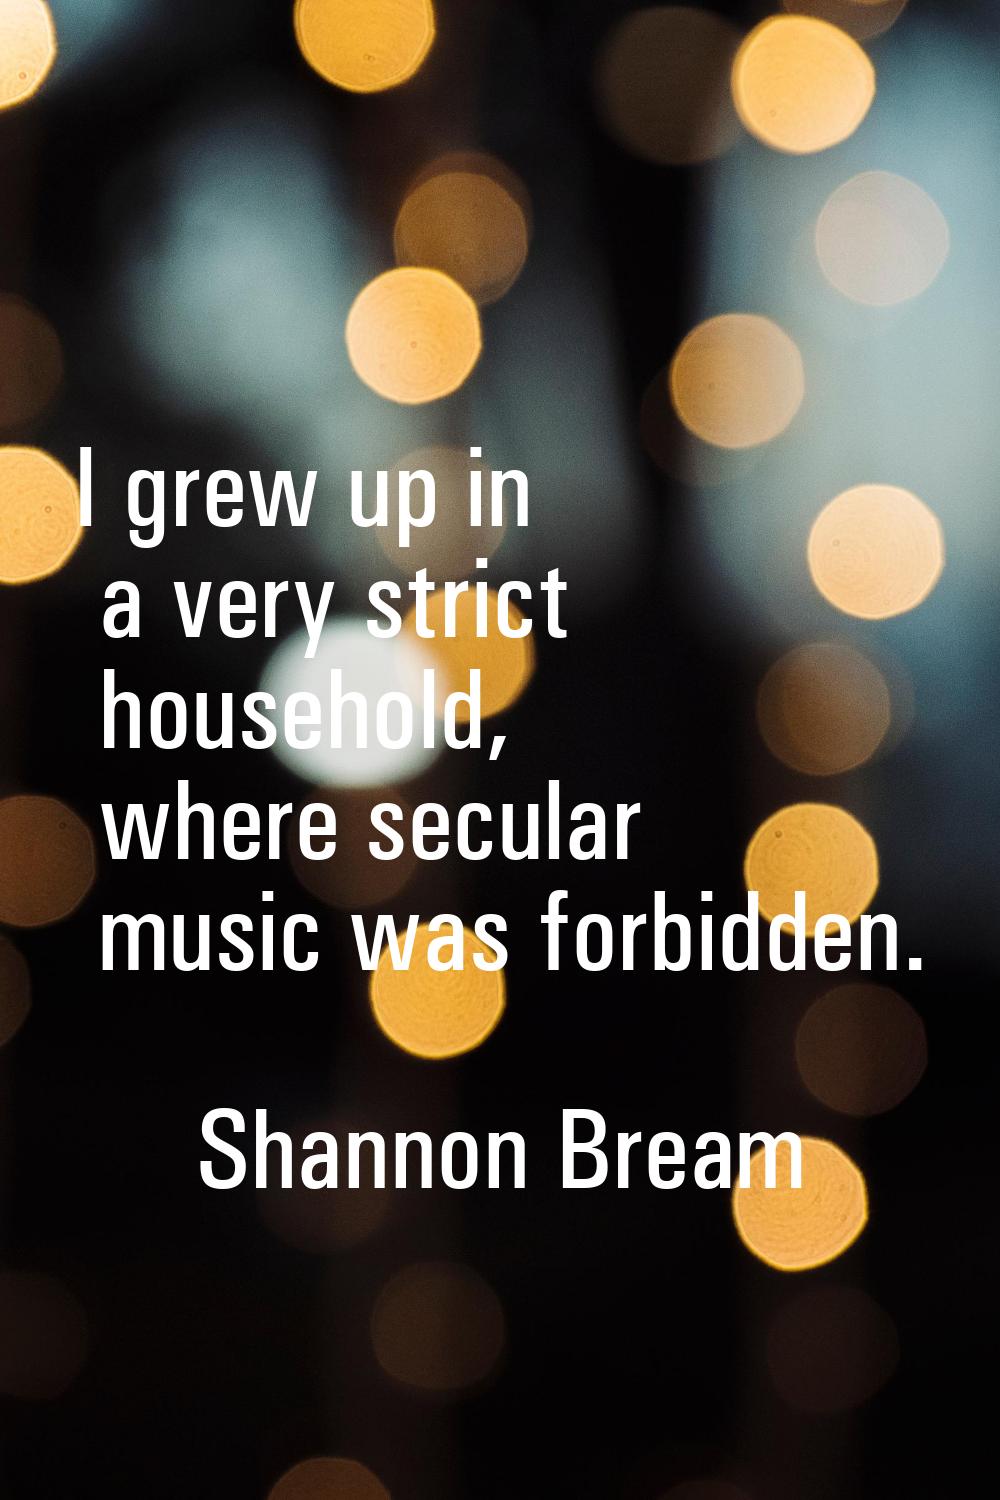 I grew up in a very strict household, where secular music was forbidden.